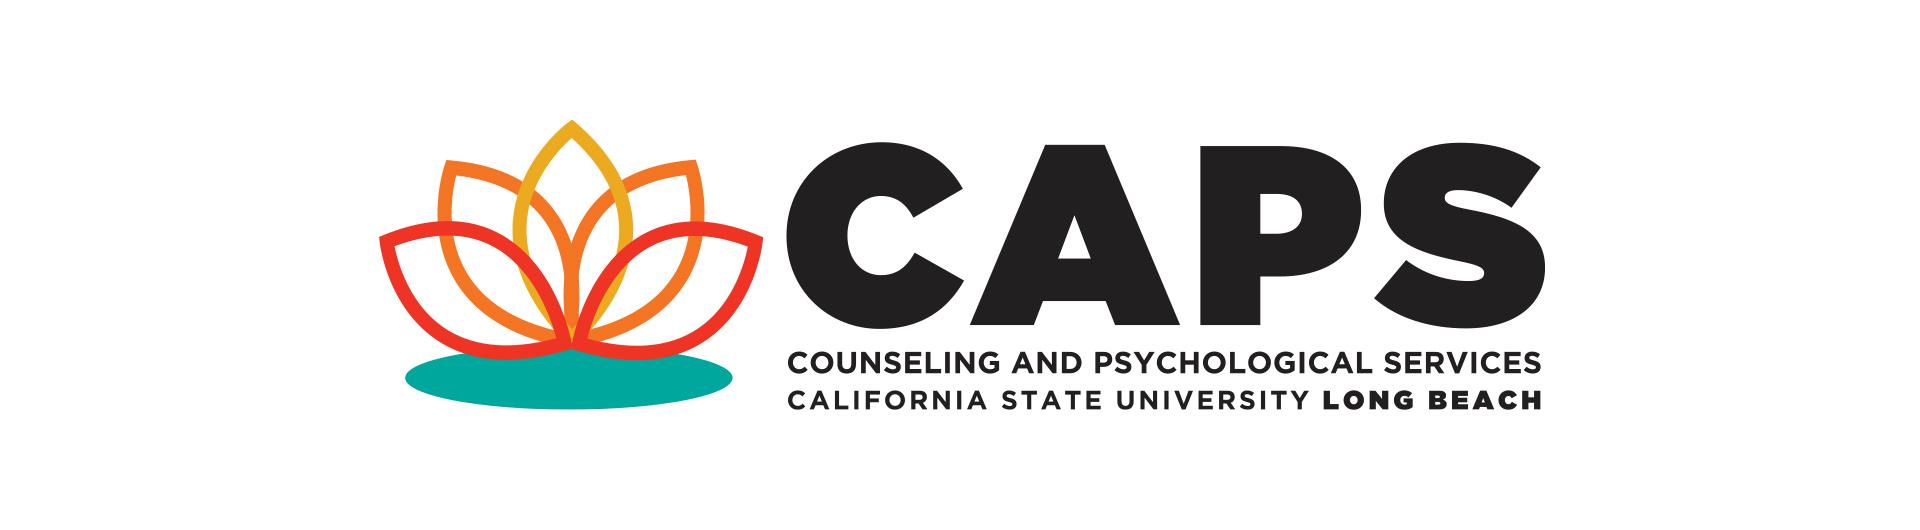 counseling and psychological services logo